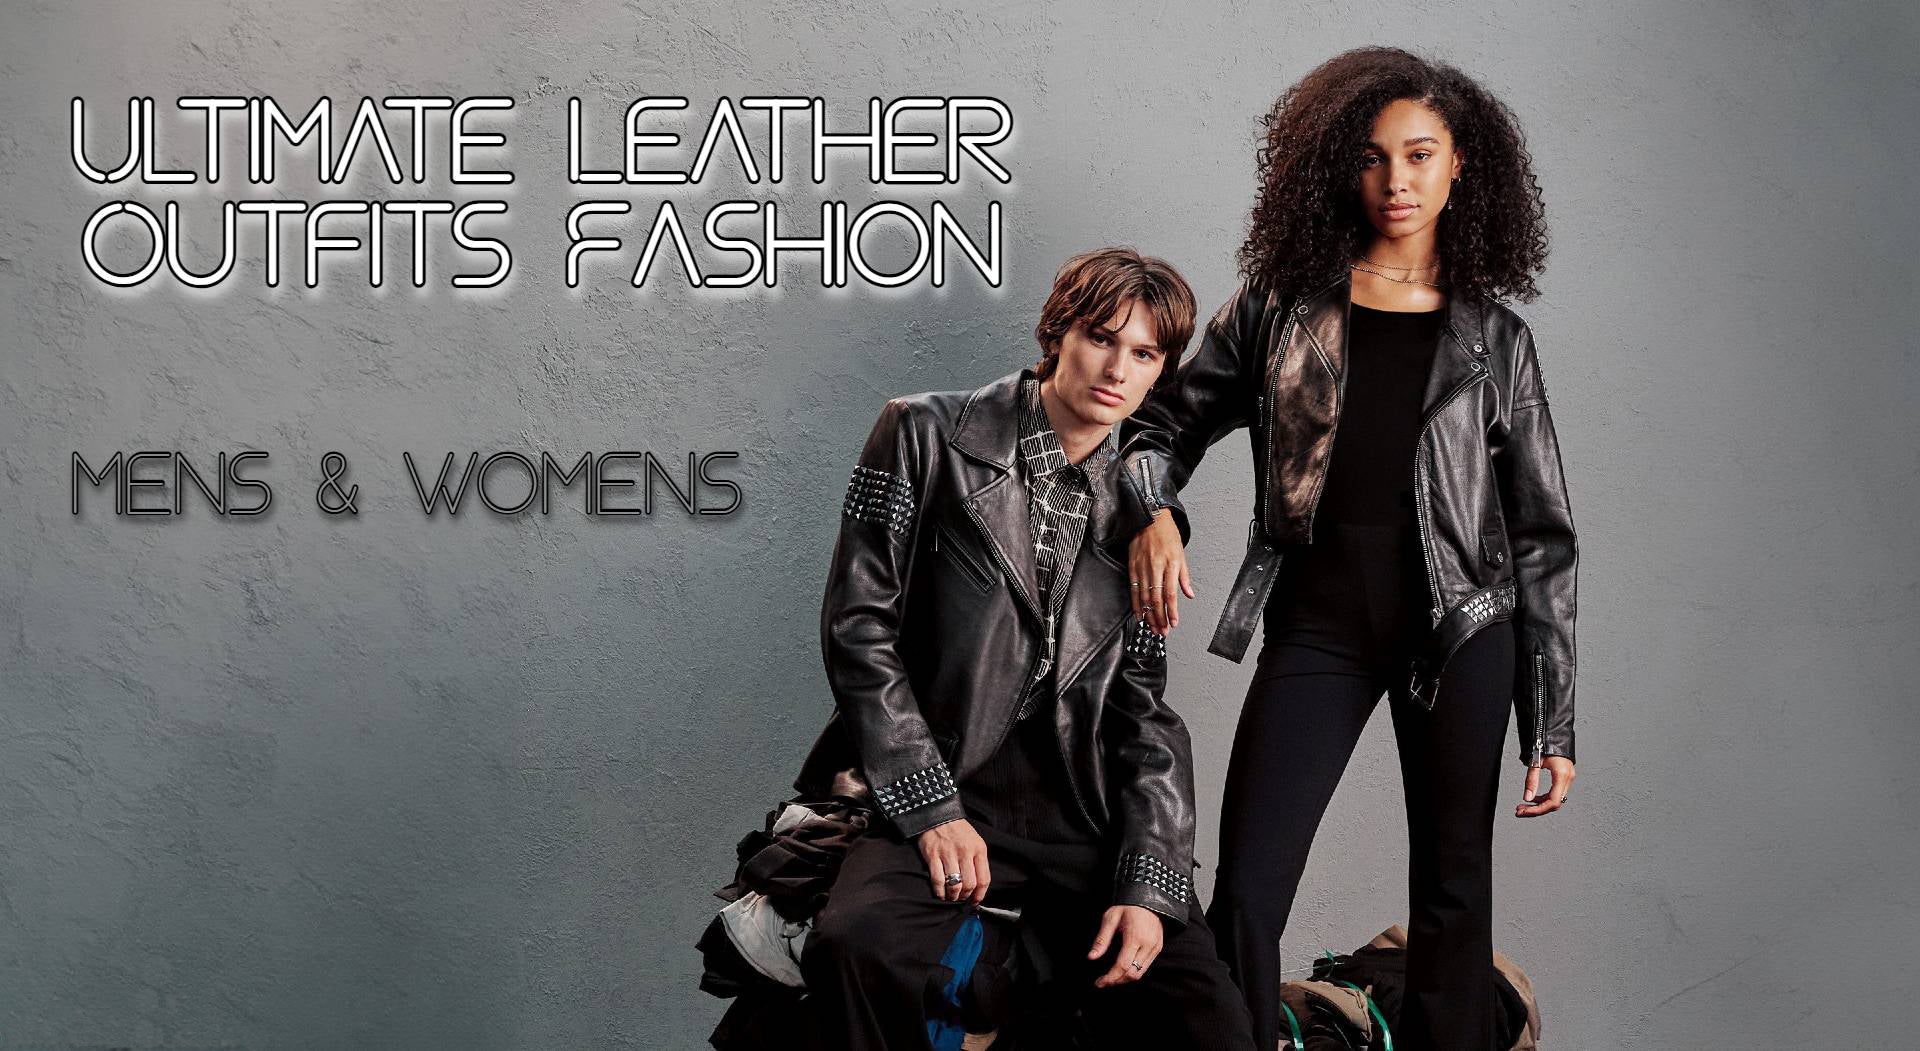 Ultimate Leather Outfits Fashion for Men's & Women